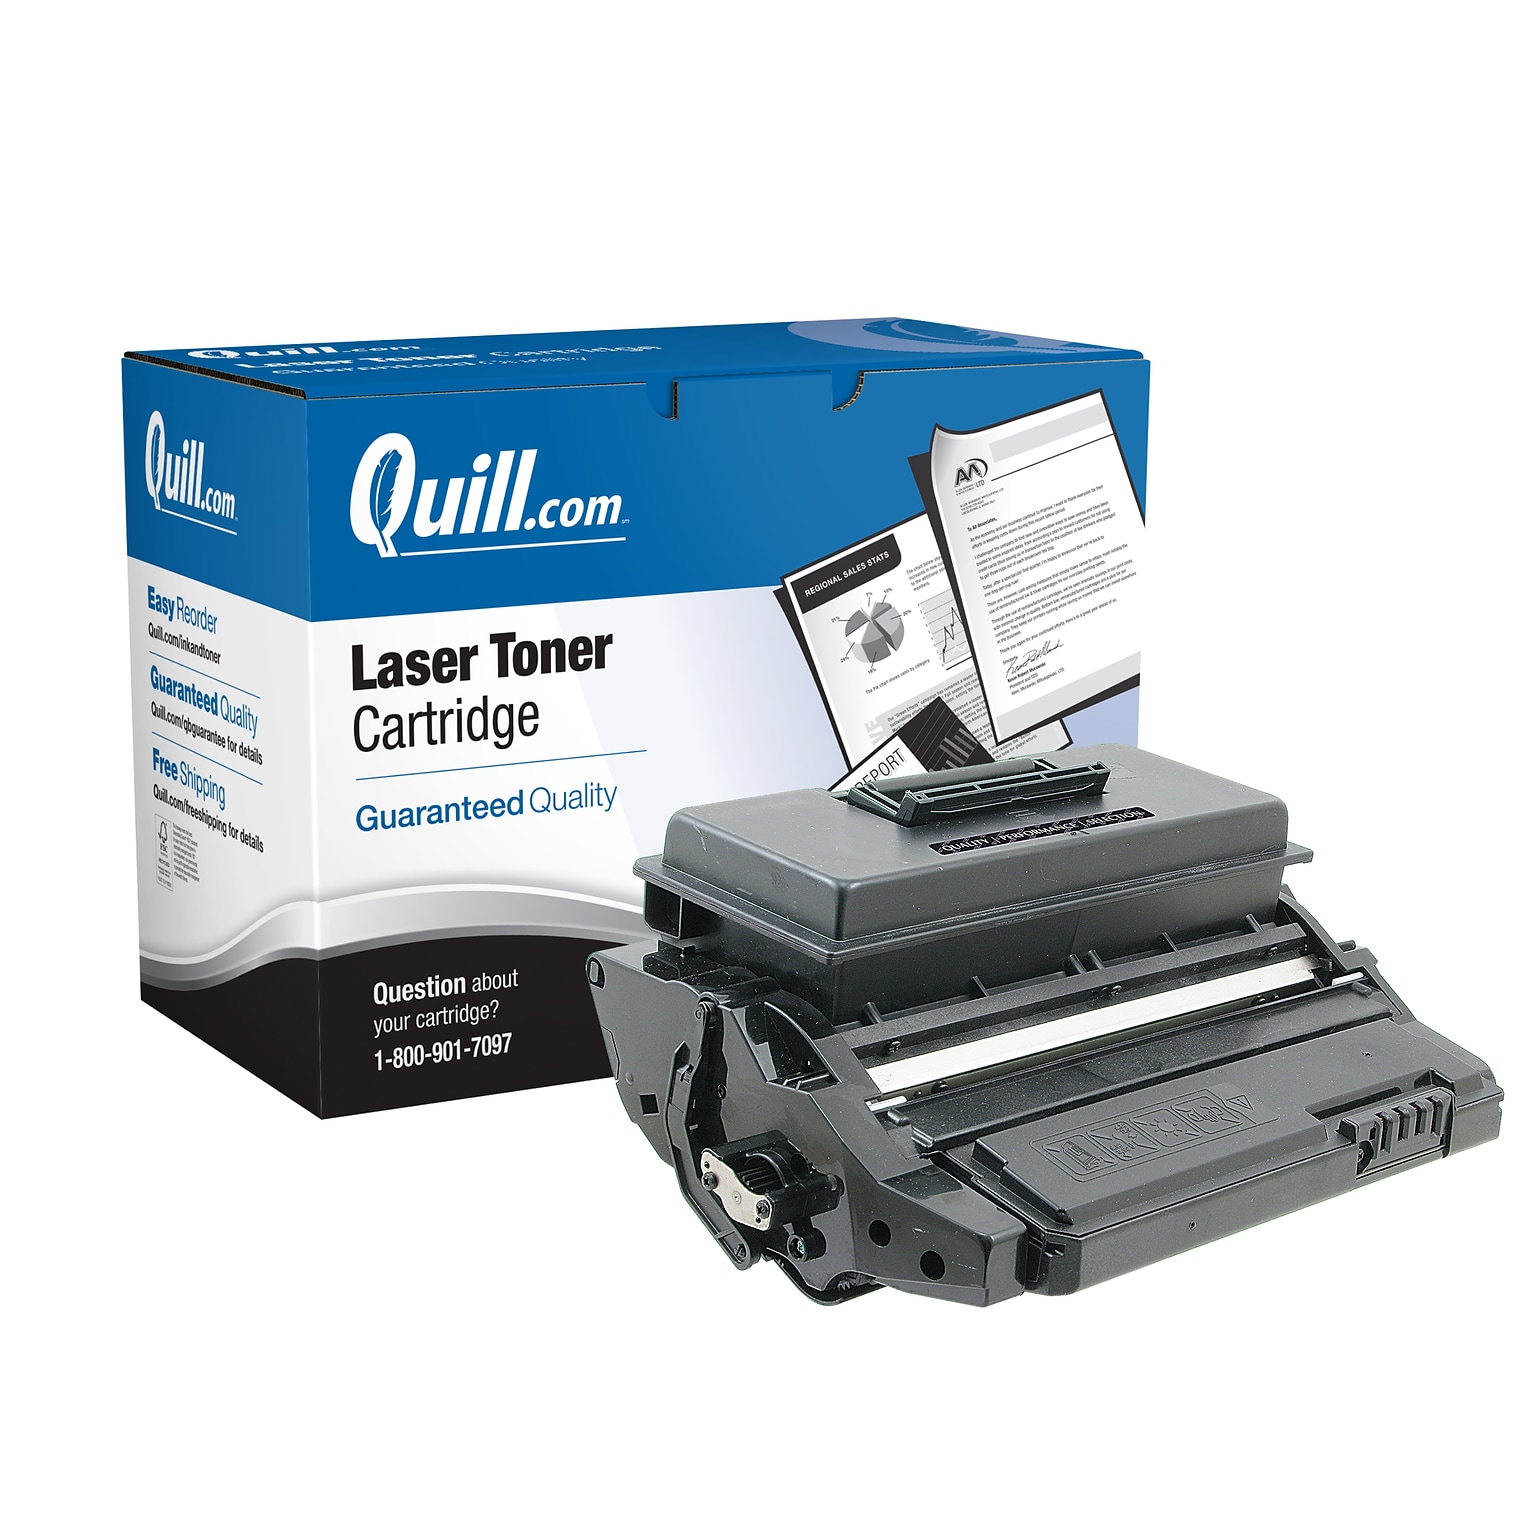 Quill Brand® Remanufactured Black High Yield Toner Cartridge Replacement for Xerox 3600 (106R01371) (Lifetime Warranty)